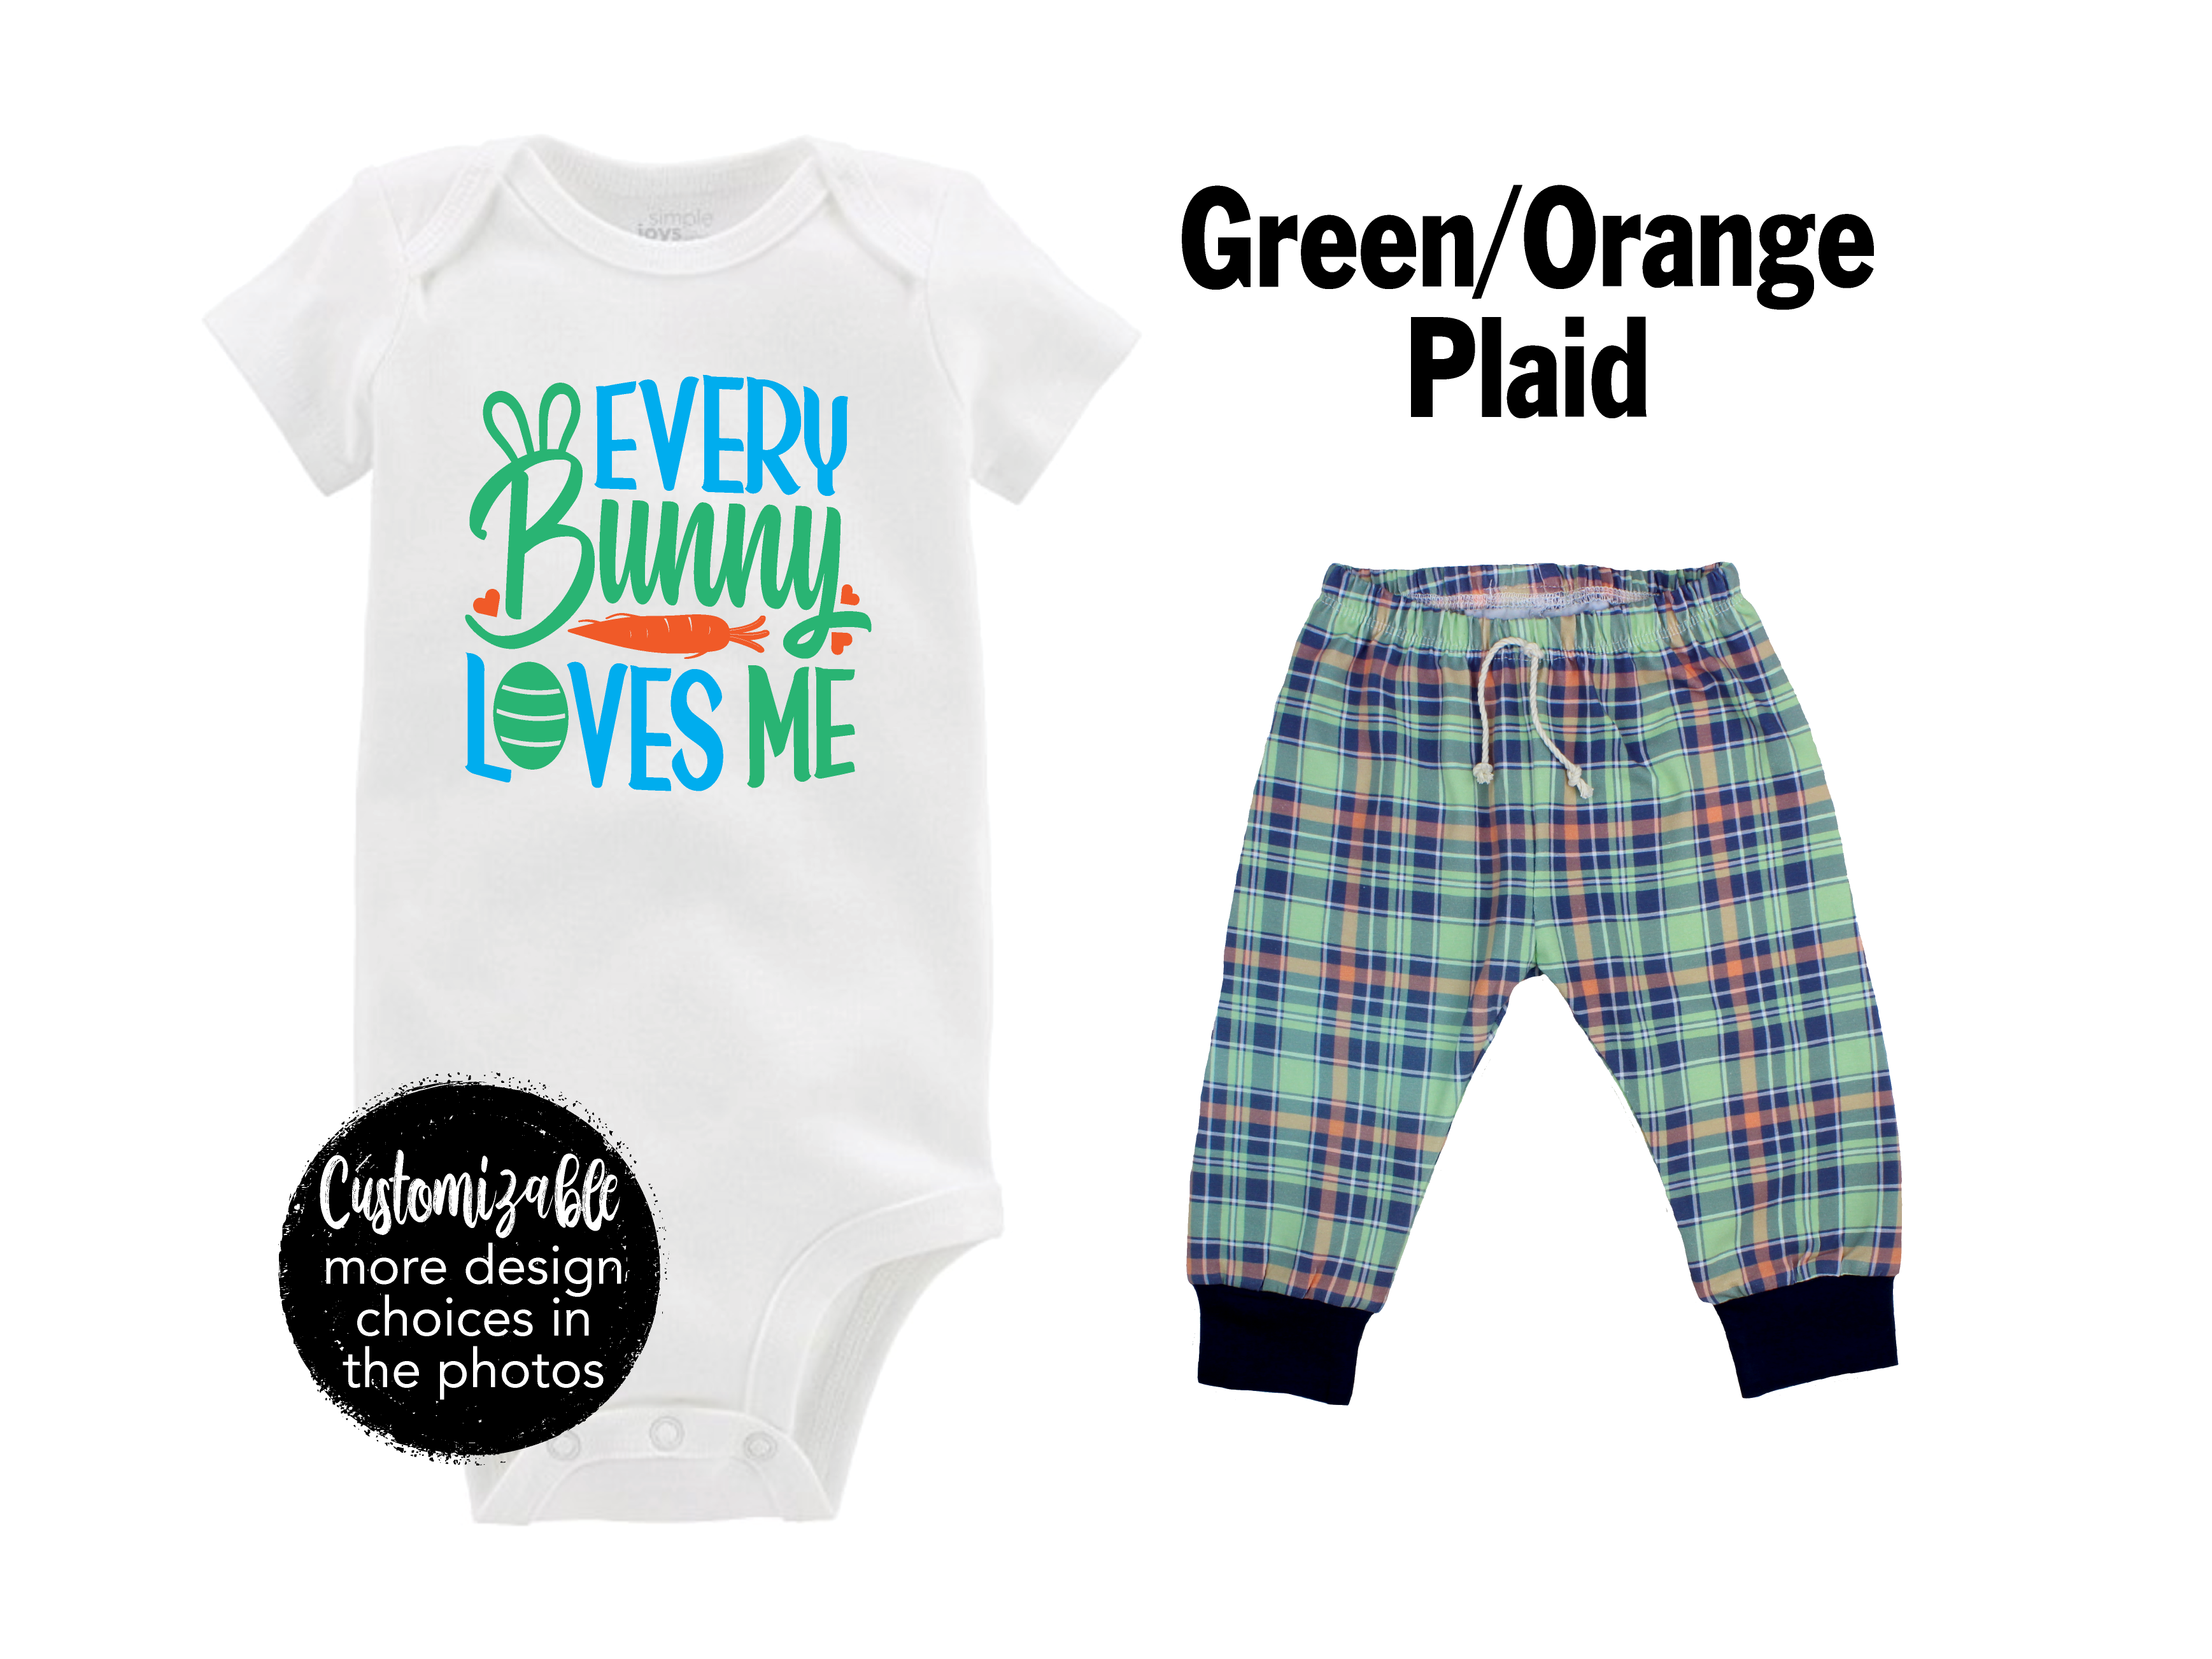 First Easter Boy Outfit Stripe Pant Baby Boy Outfit